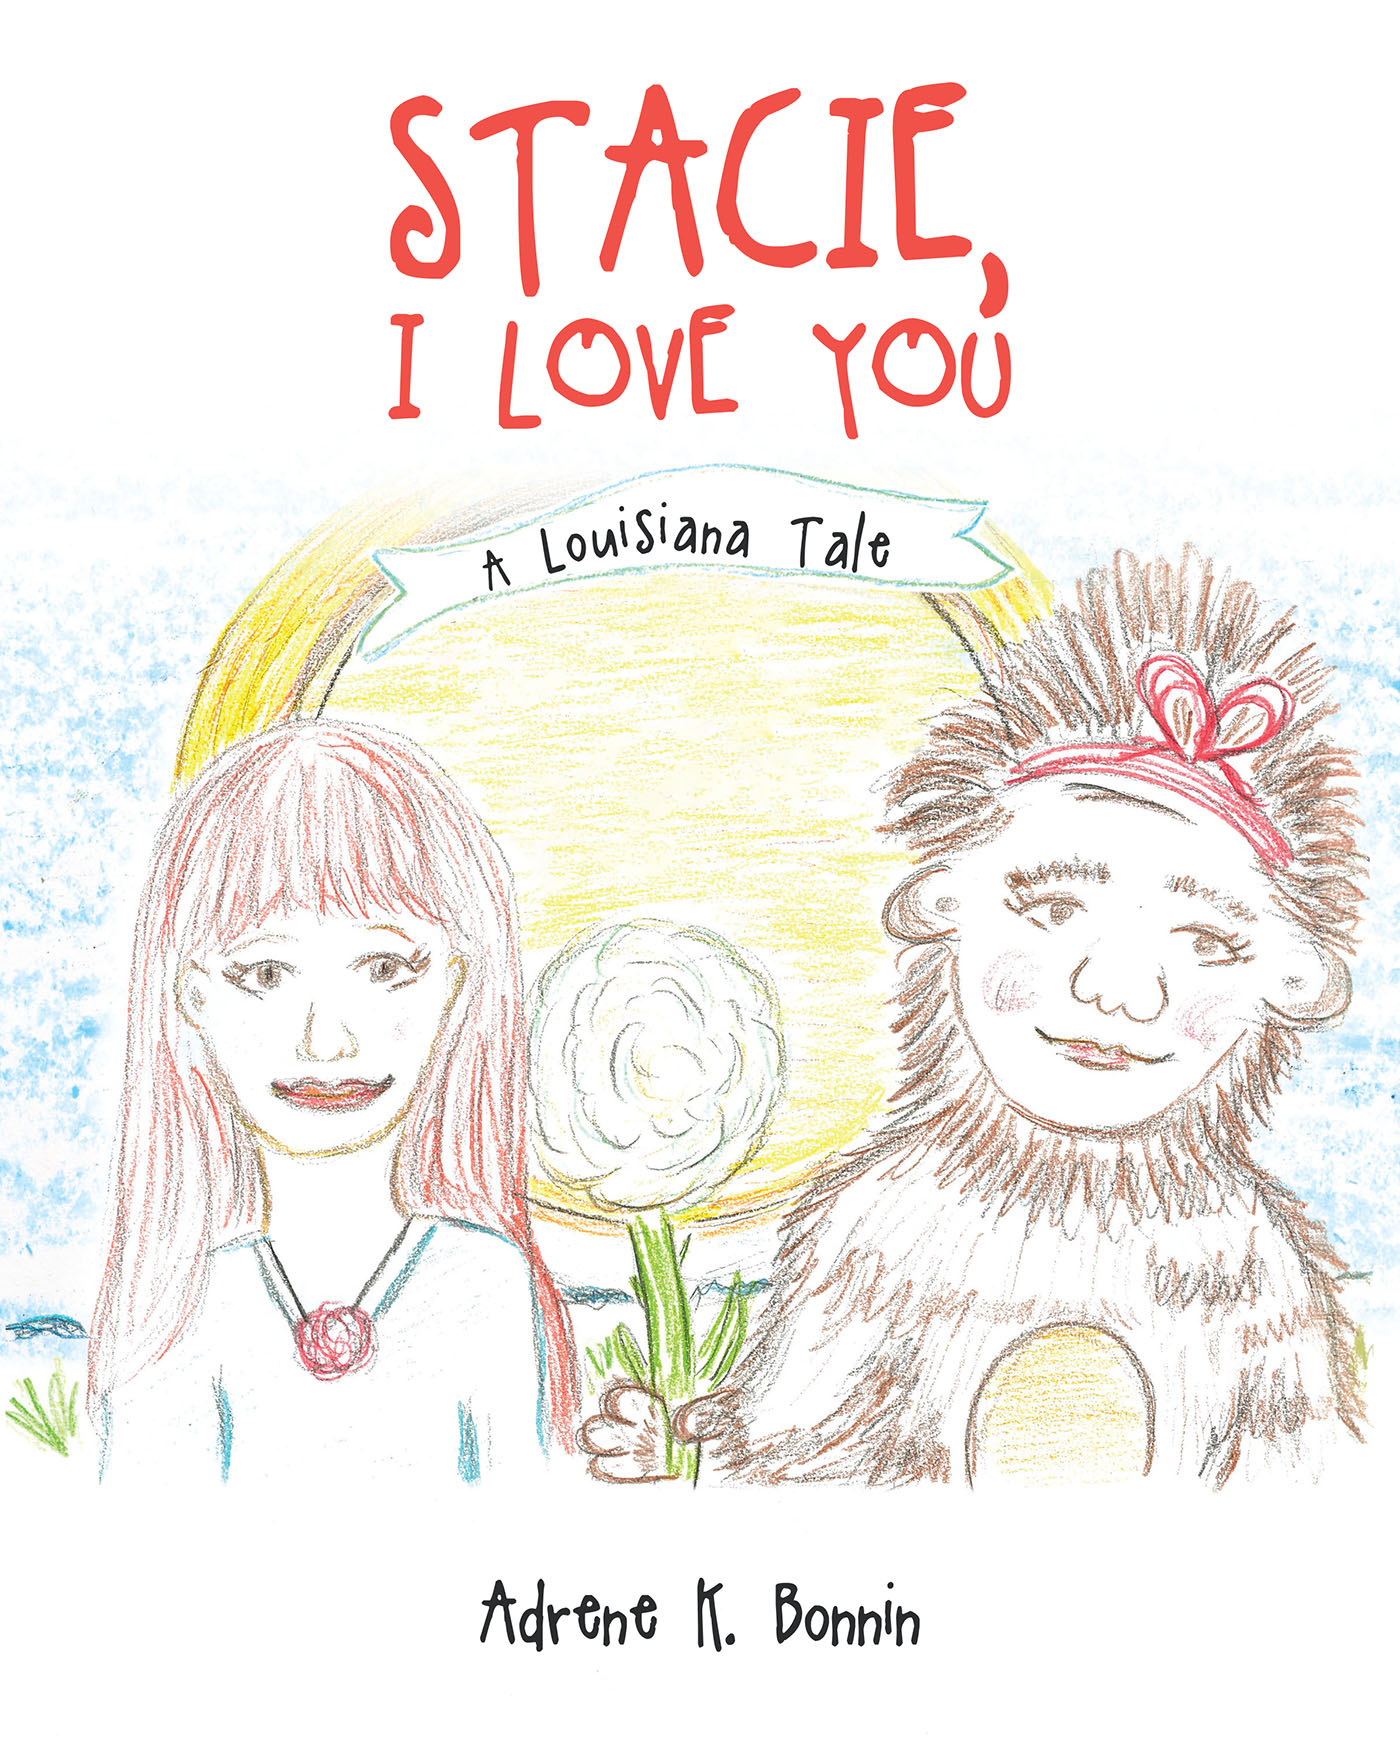 Author Adrene K. Bonnin’s New Book, "Stacie, I Love You: A Louisiana Tale," is an Engaging Story of Two Families Who Become Connected Through an Unfortunate Mix-Up